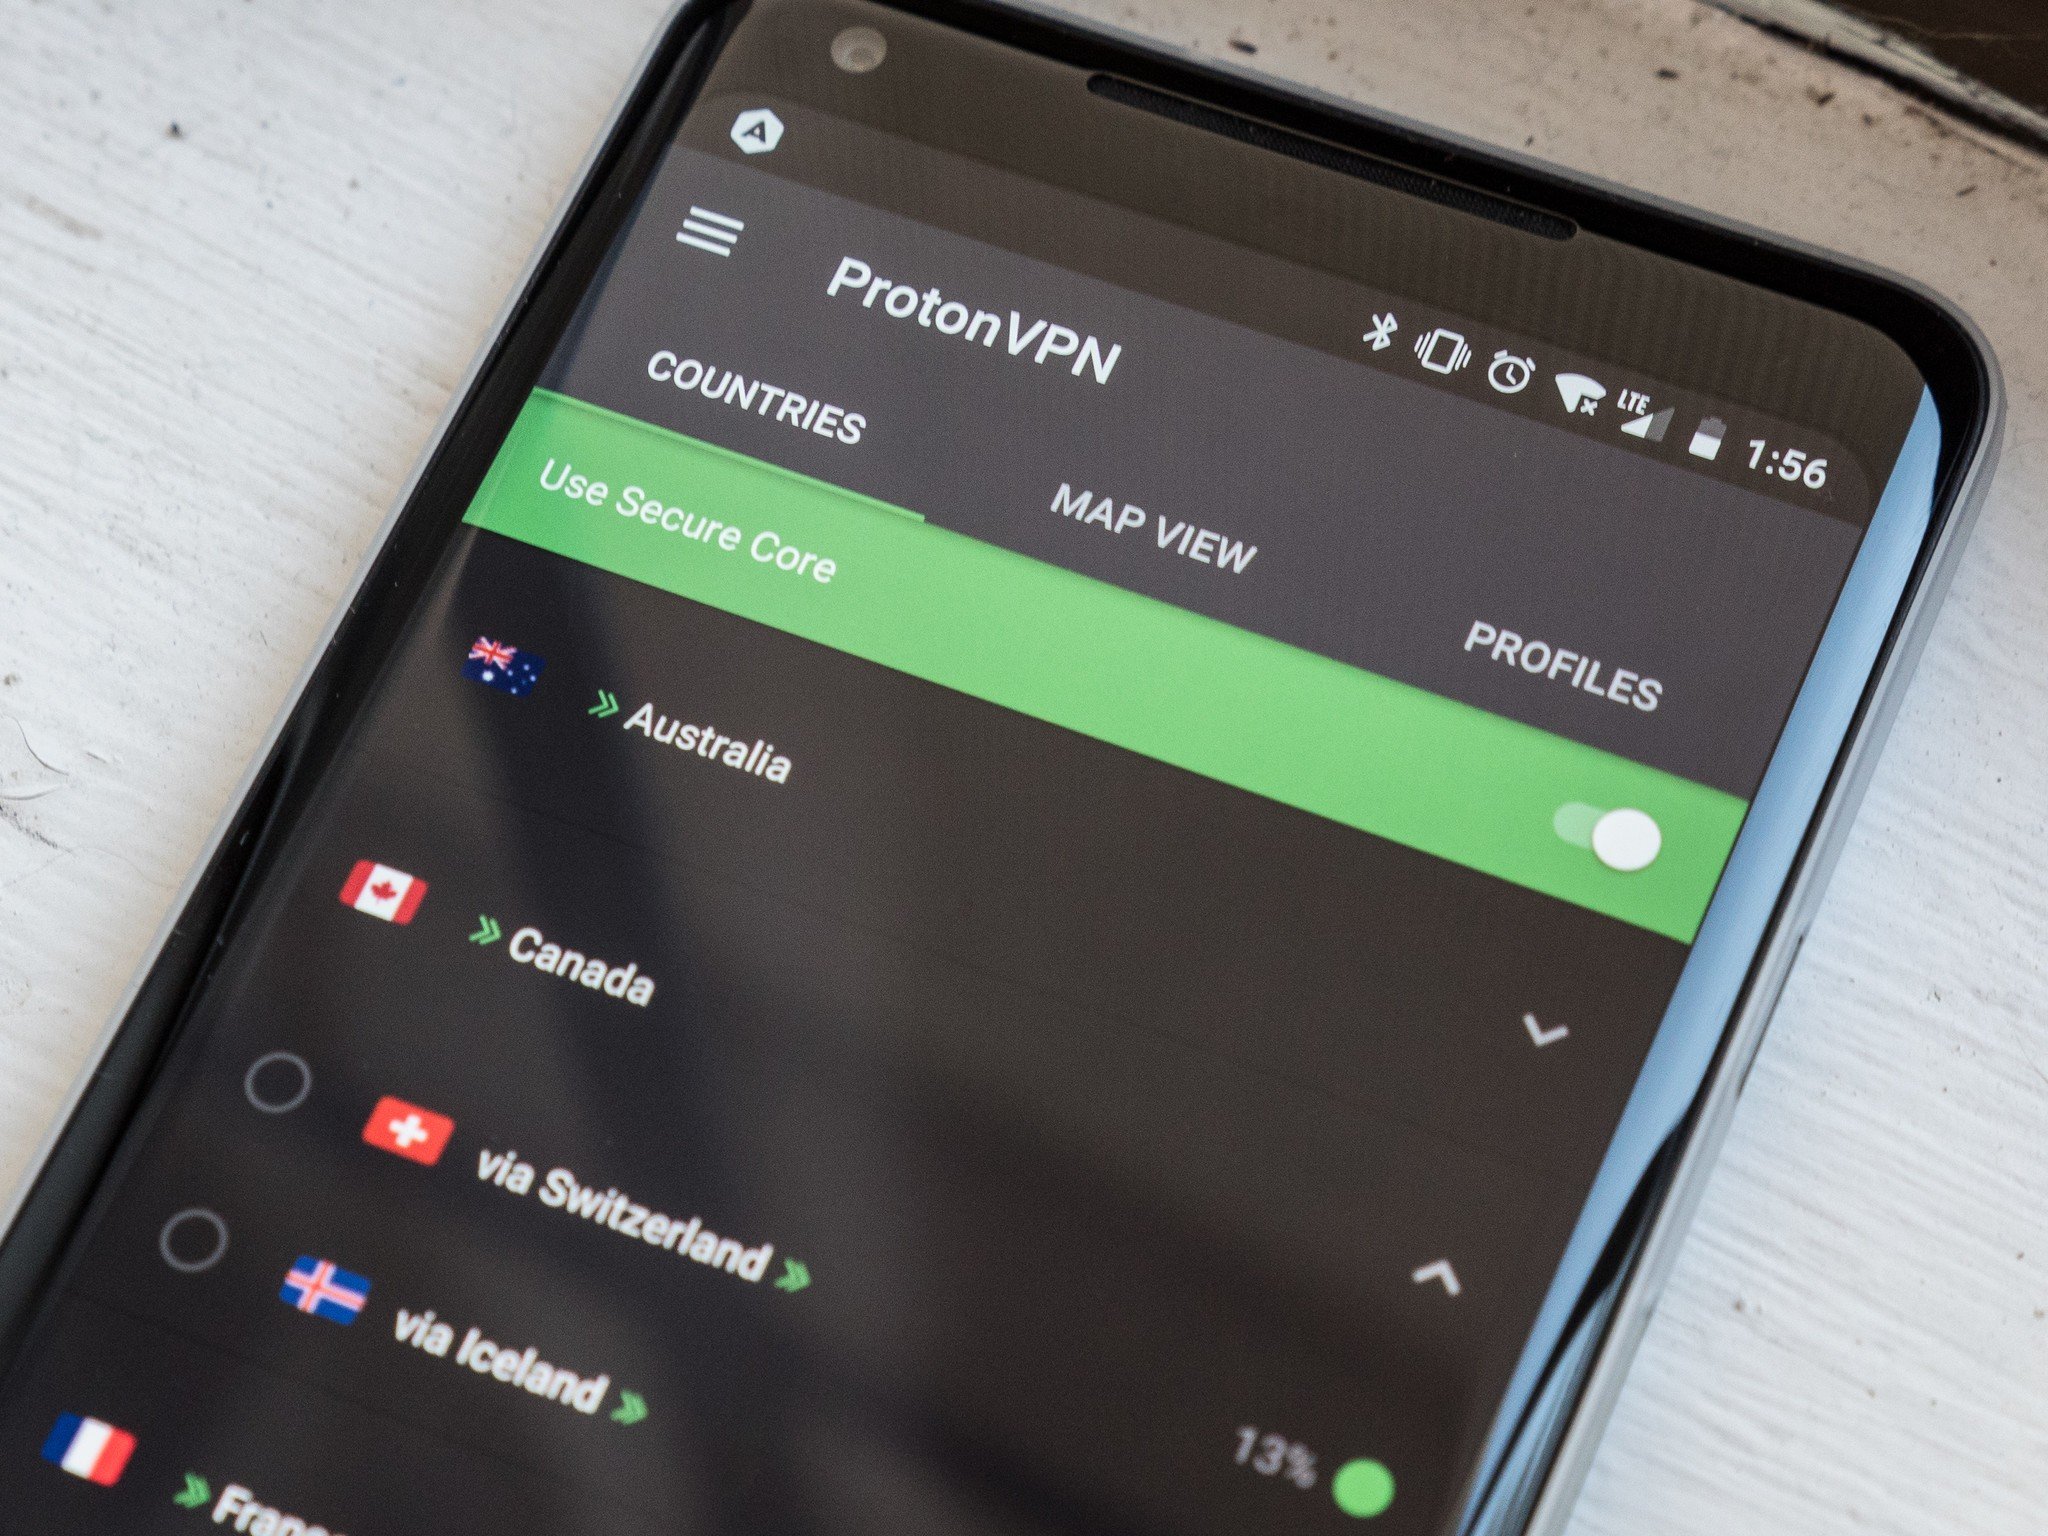 Should you use a VPN on your phone?